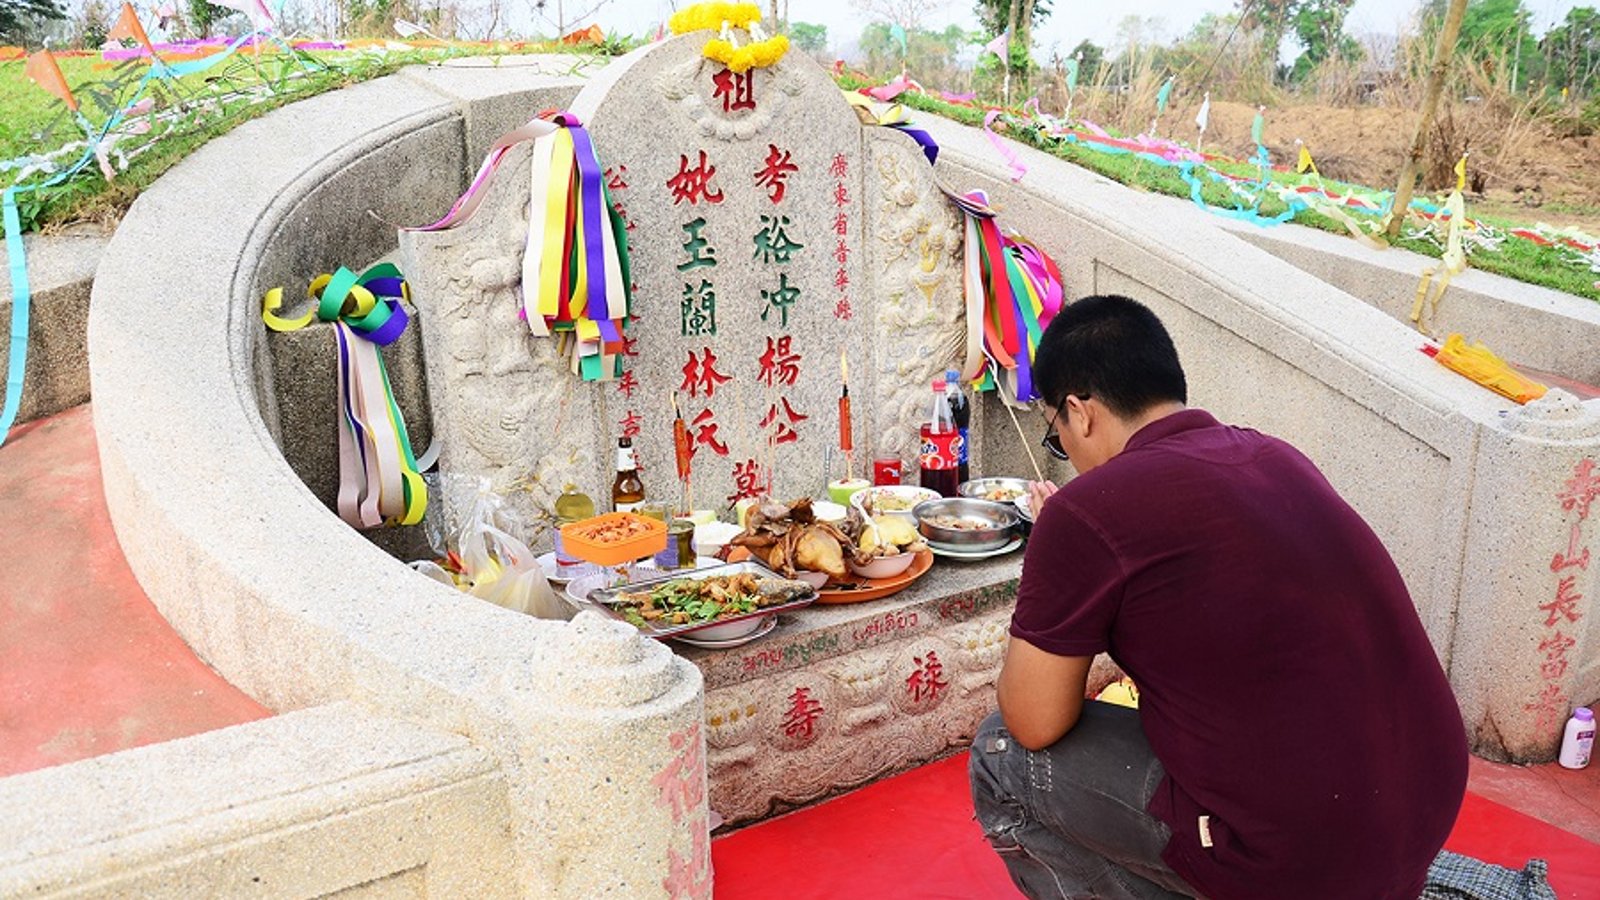 Death and Syncretism in China